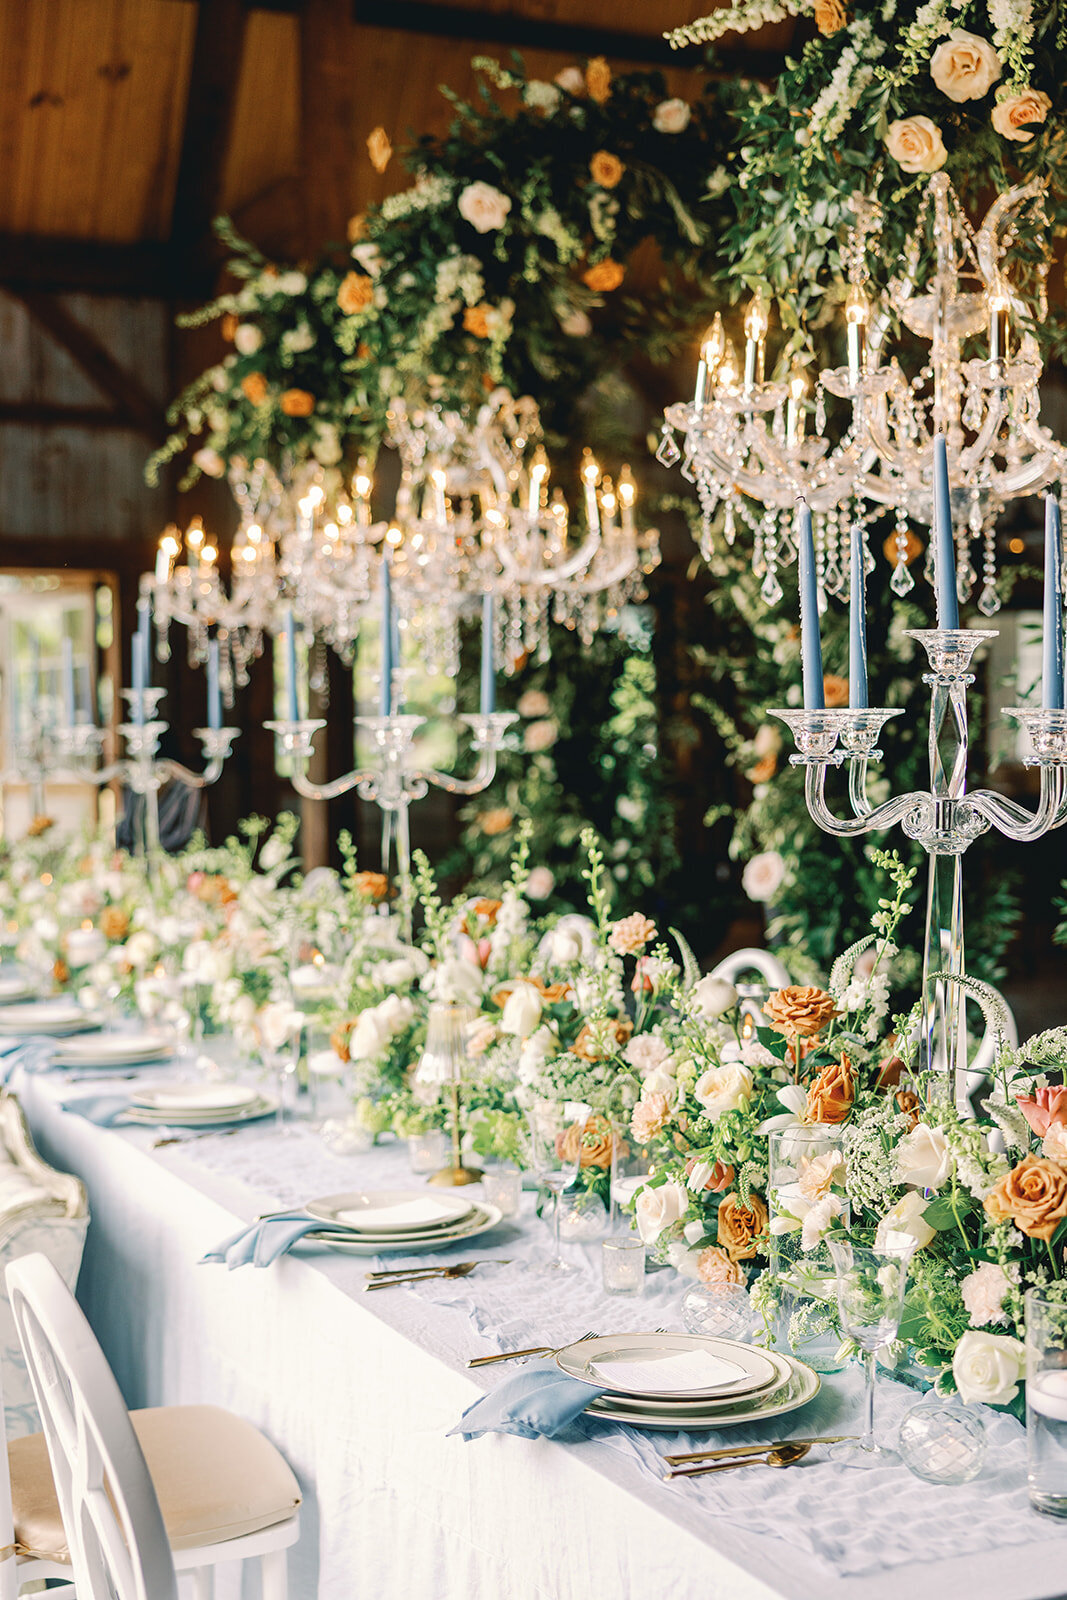 Elaborate table setting with large orange and green floral centerpieces, blue candles and floral arrangements hanging in the chandeliers